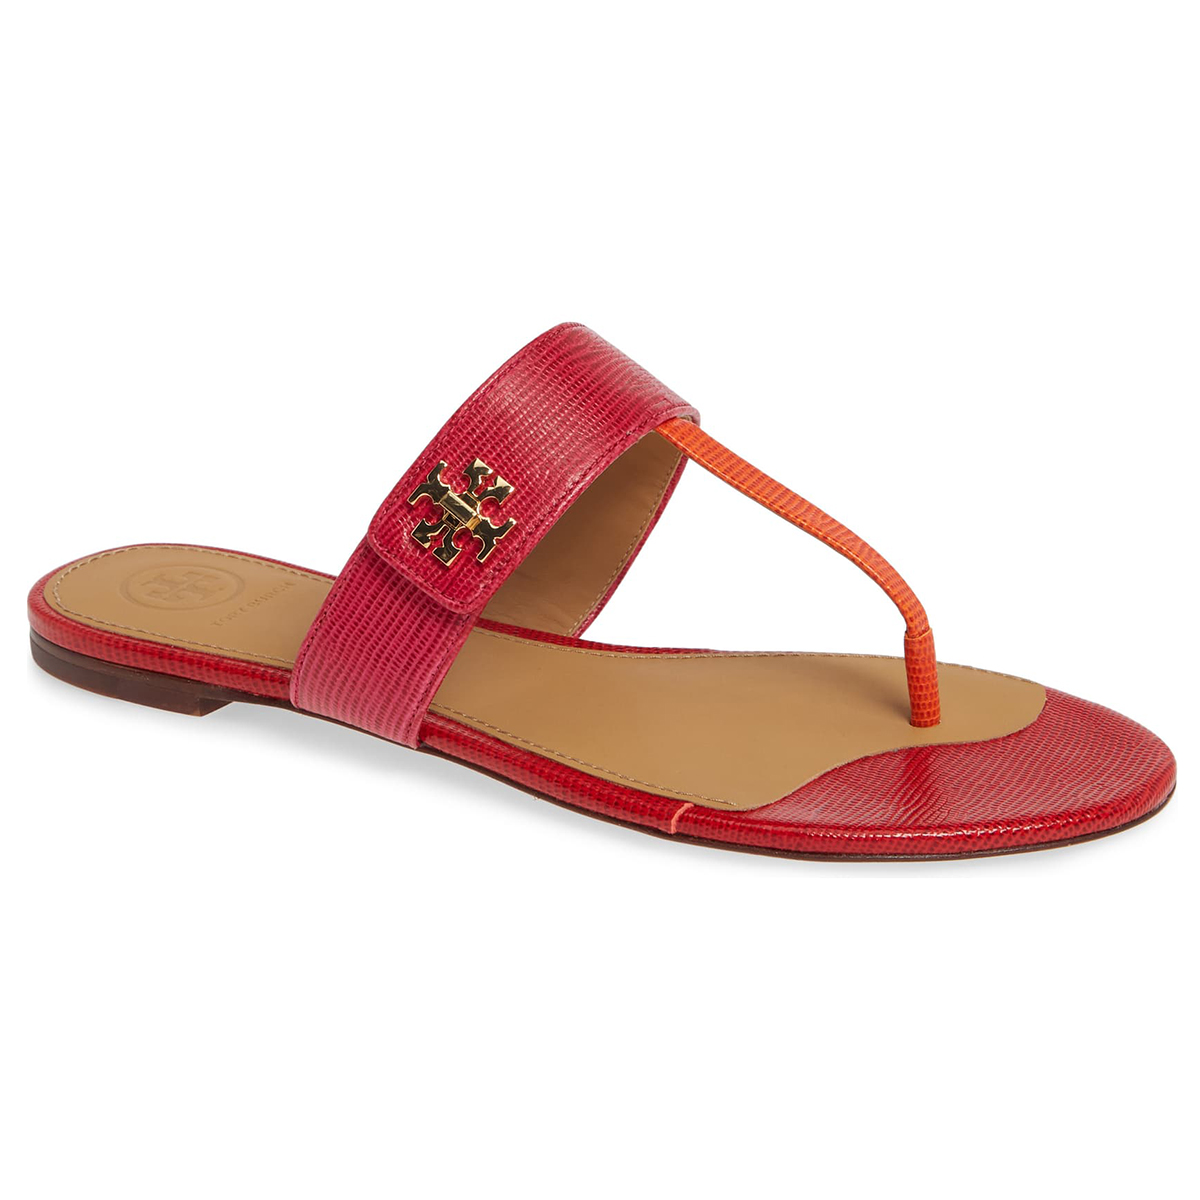 tory burch shoes sale nordstrom